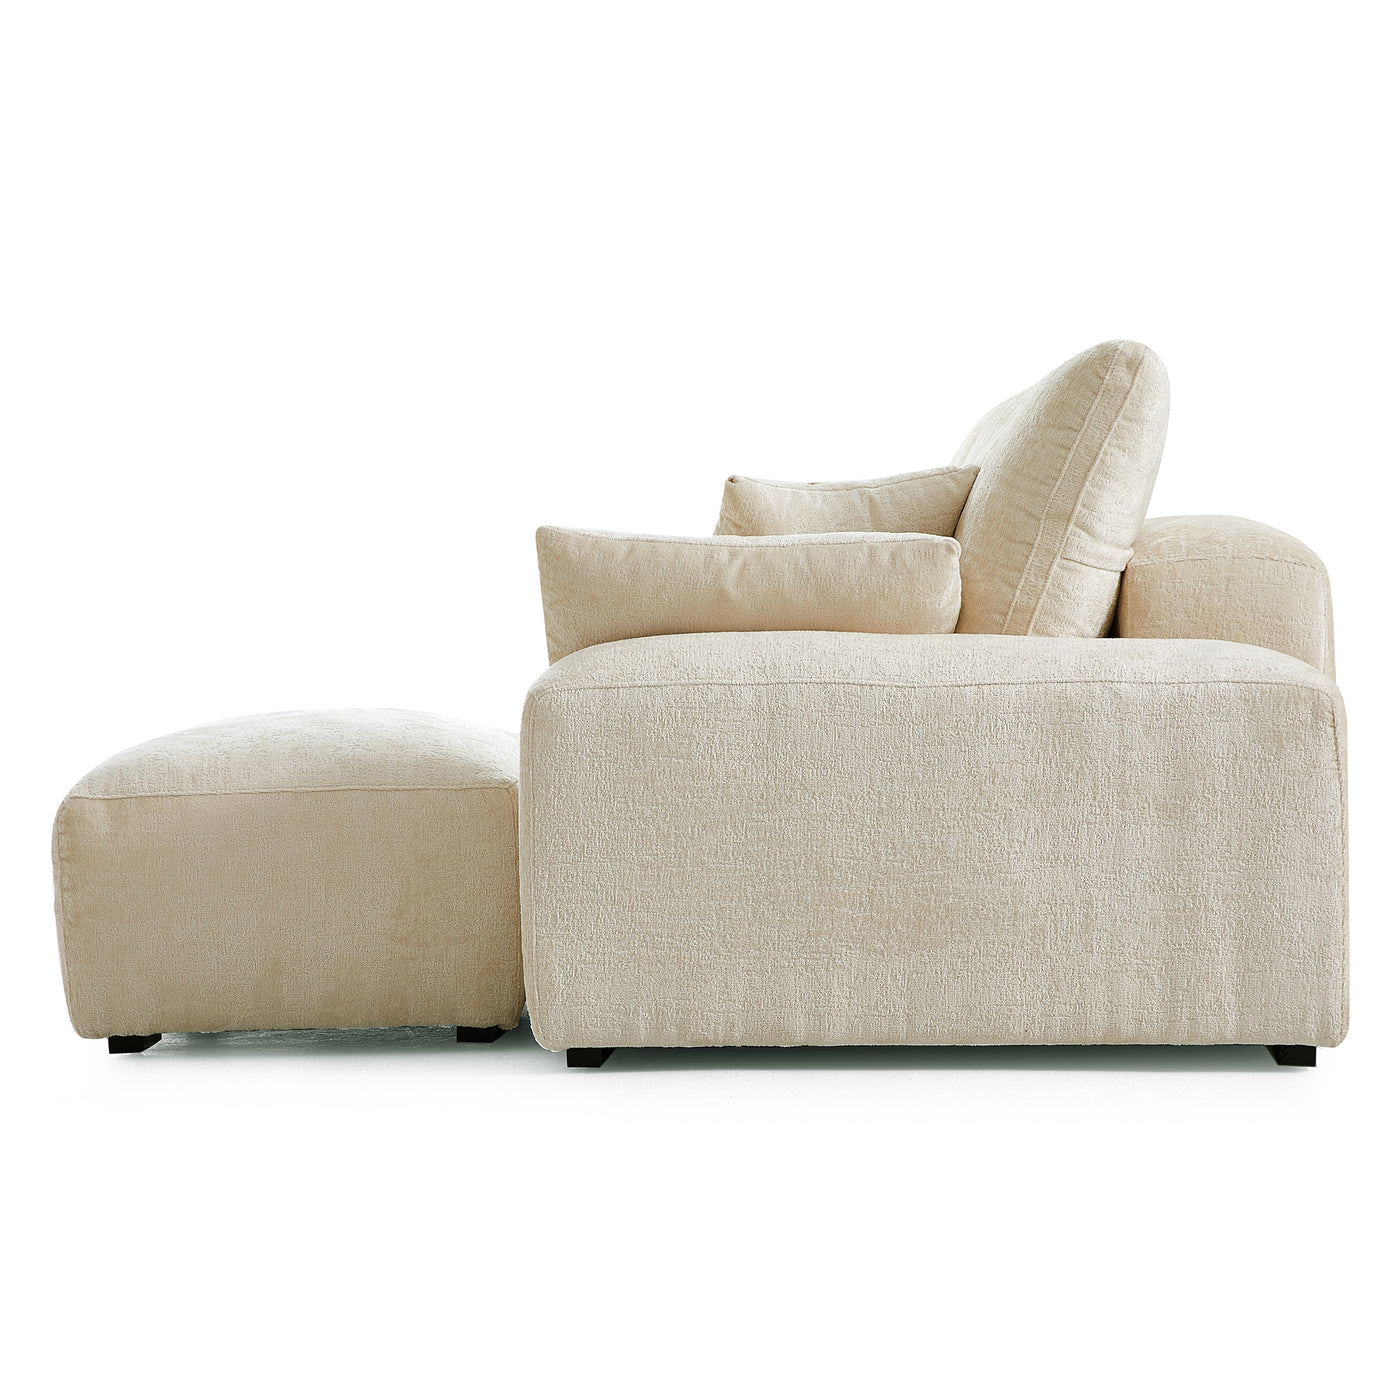 The Empress Camel Sofa and Ottoman-Beige